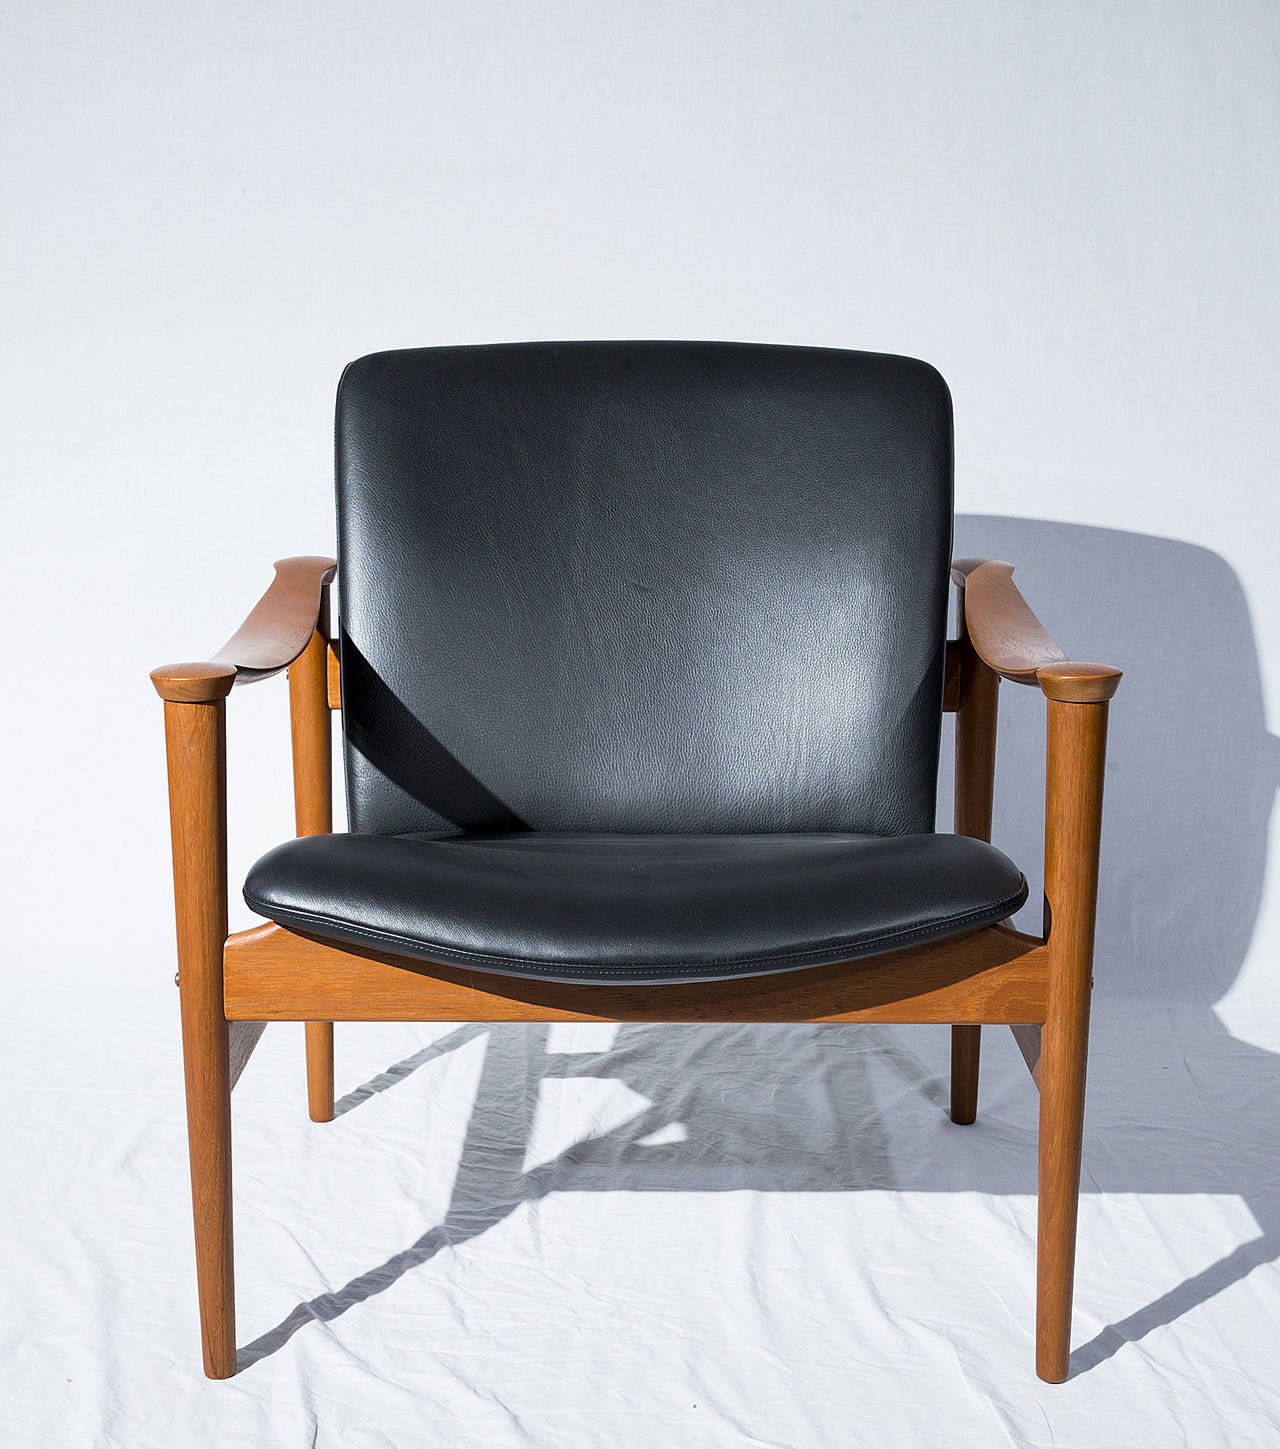 Fredrik Kayser lounge chair designed in 1961 and produced by Vatne Mobler. Note: We have a pair available.